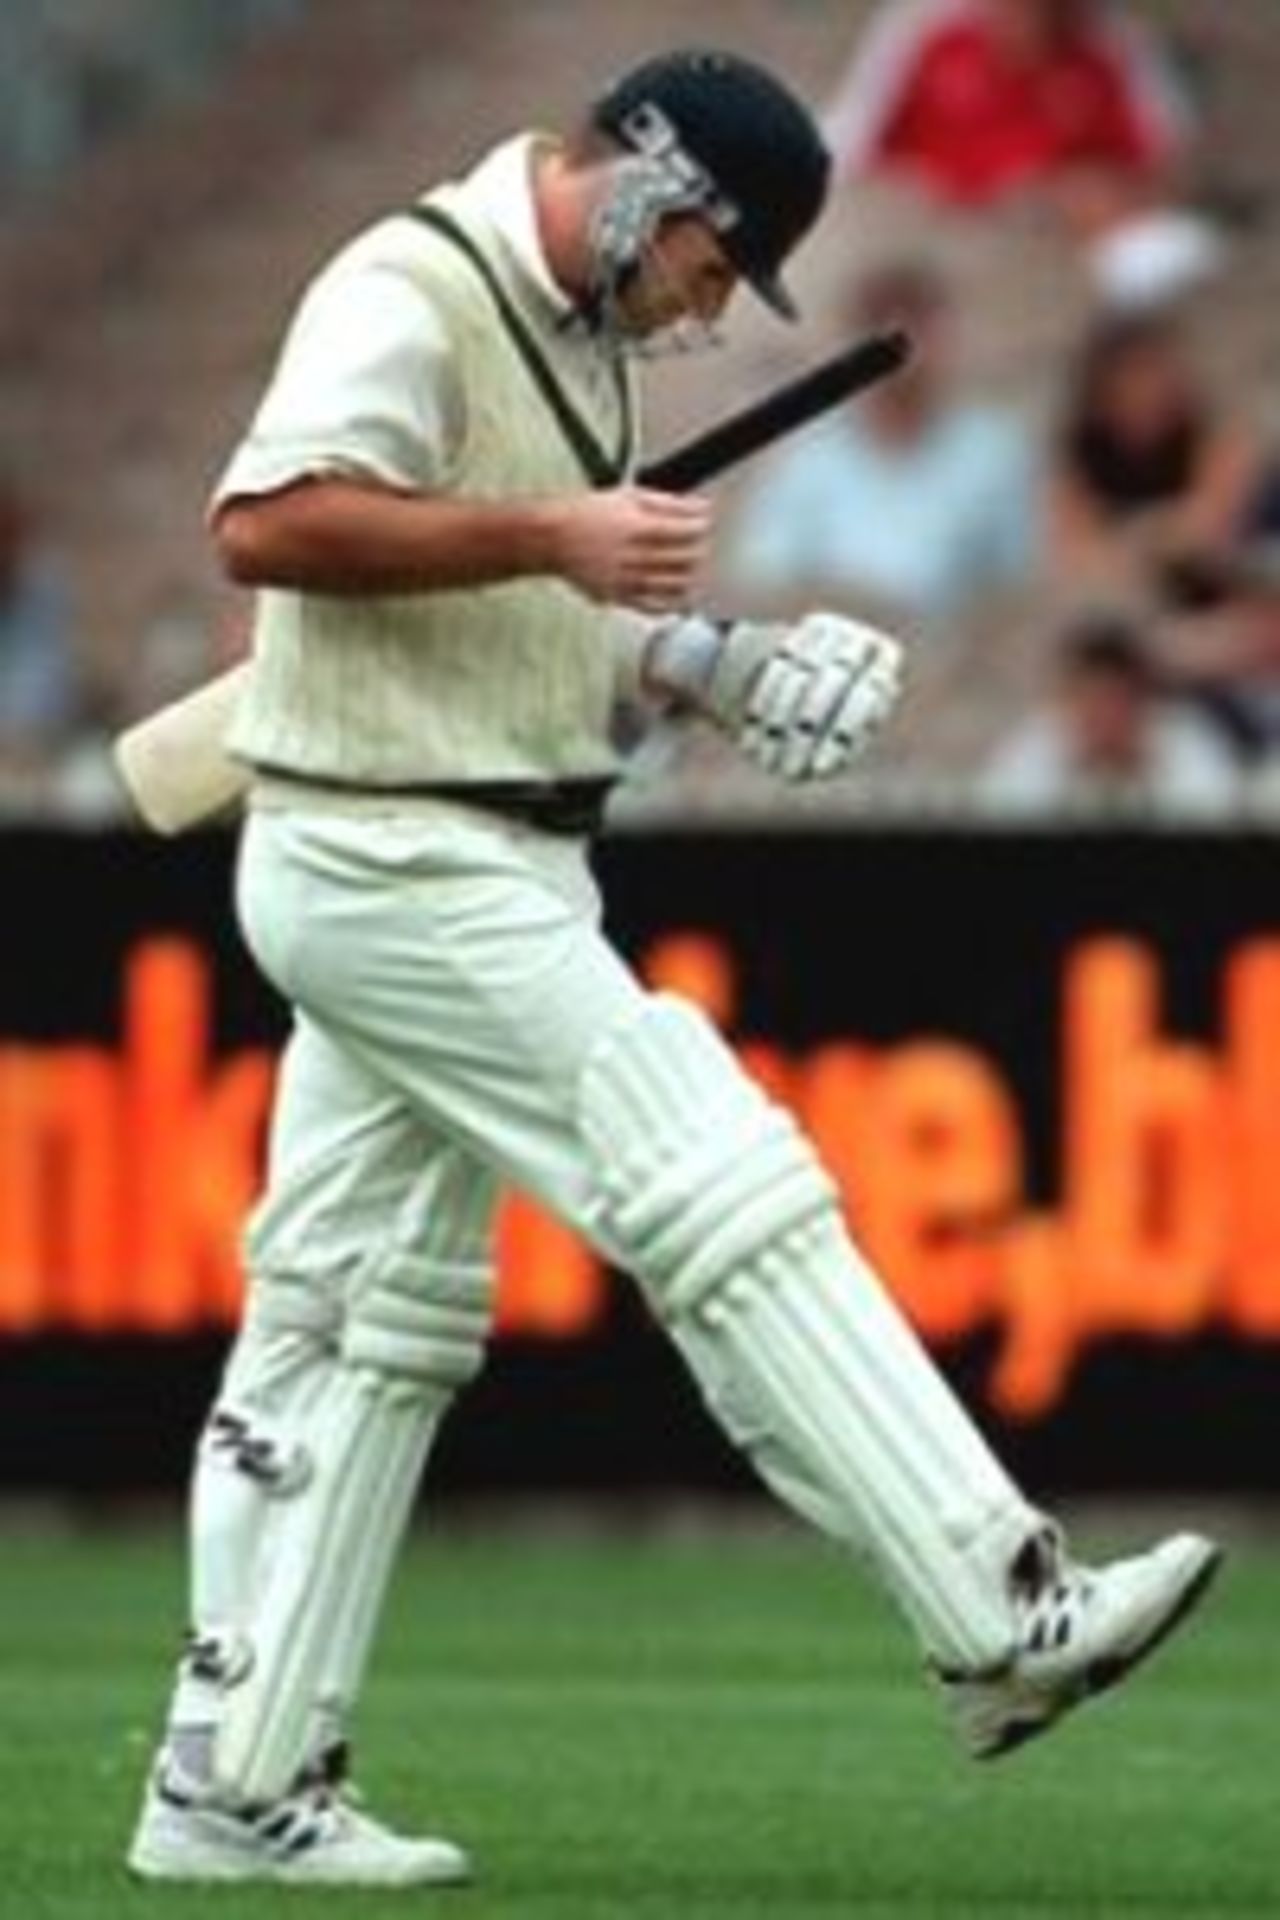 26 Dec 1999: Australian cricket team batsman Mark Waugh is dejected after being given out lbw for forty one runs off the bowling of Ajit Agarkar during the Boxing Day Cricket Test match between Australia and India at the Melbourne Cricket Ground, Melbourne, Australia.